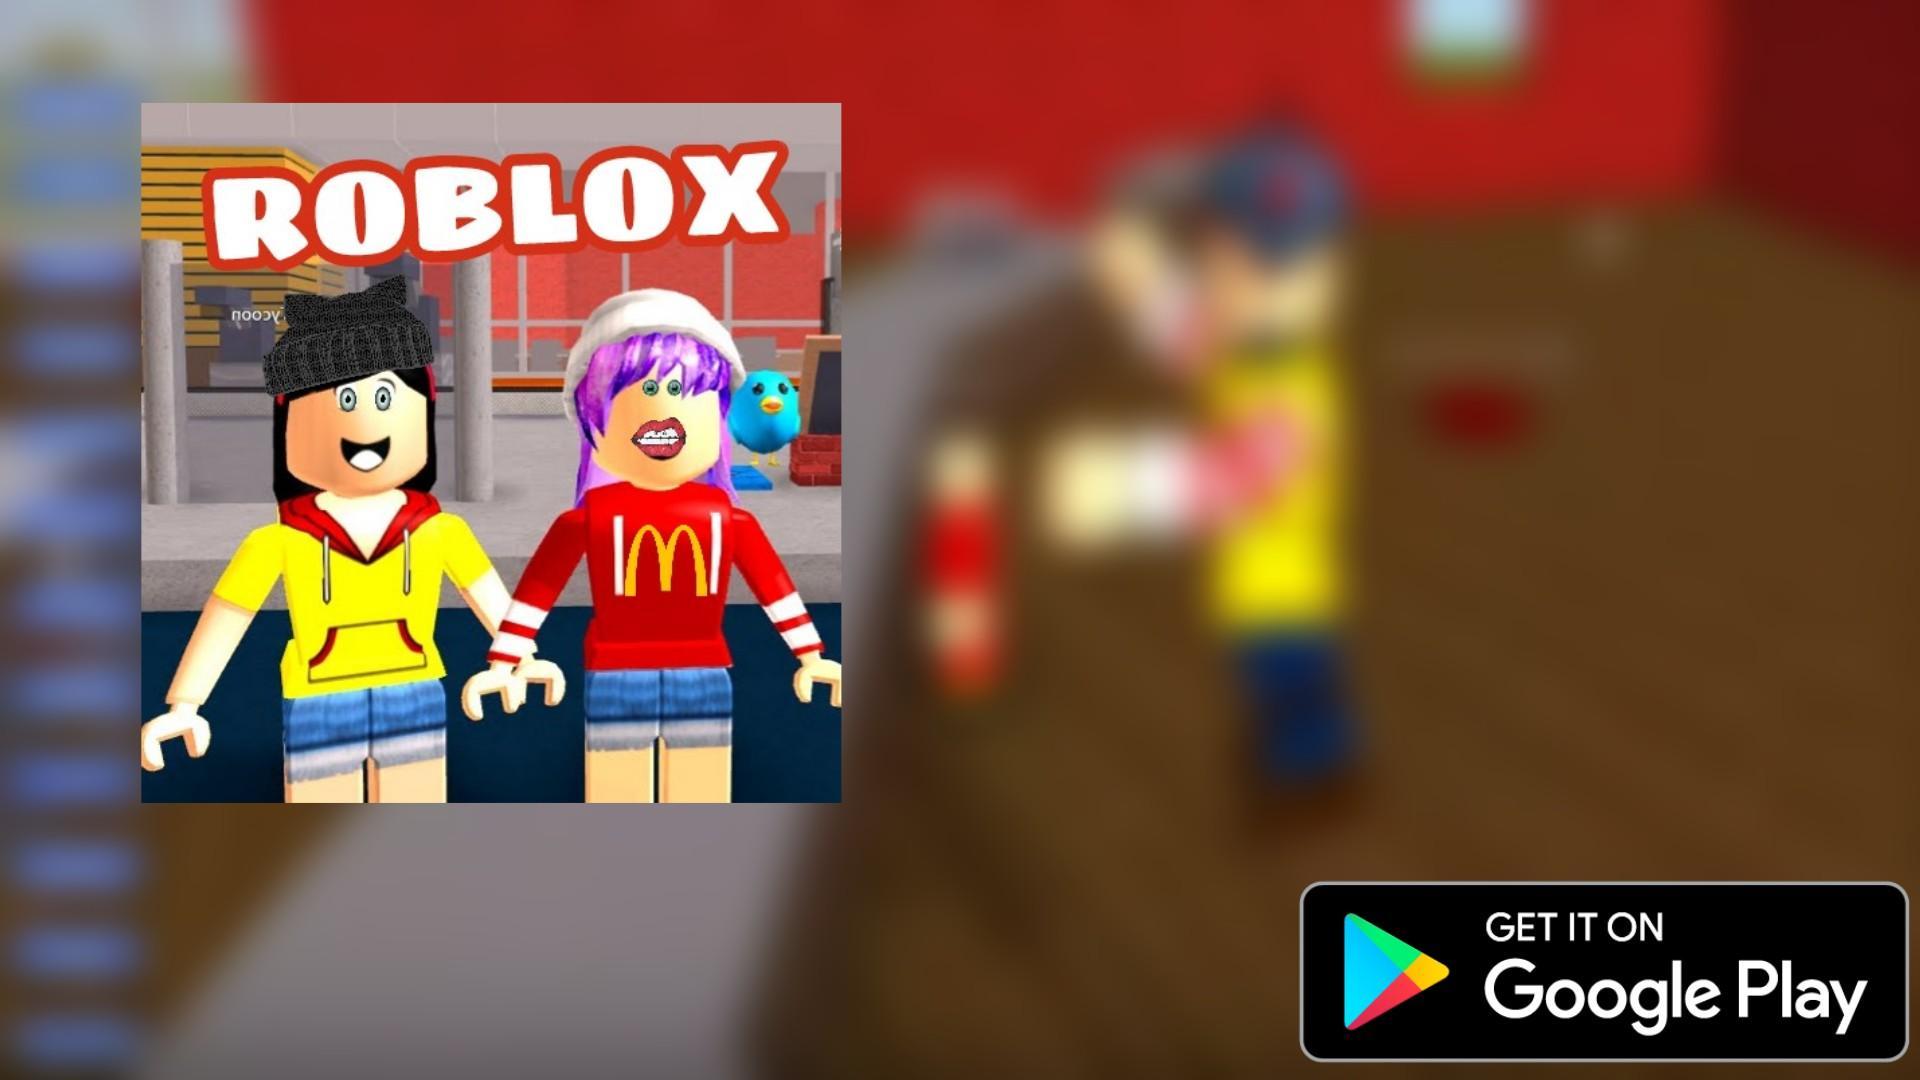 Mcdonalds Tycoon Roblox Tips For Android Apk Download - download new retail tycoon roblox tips apk latest version